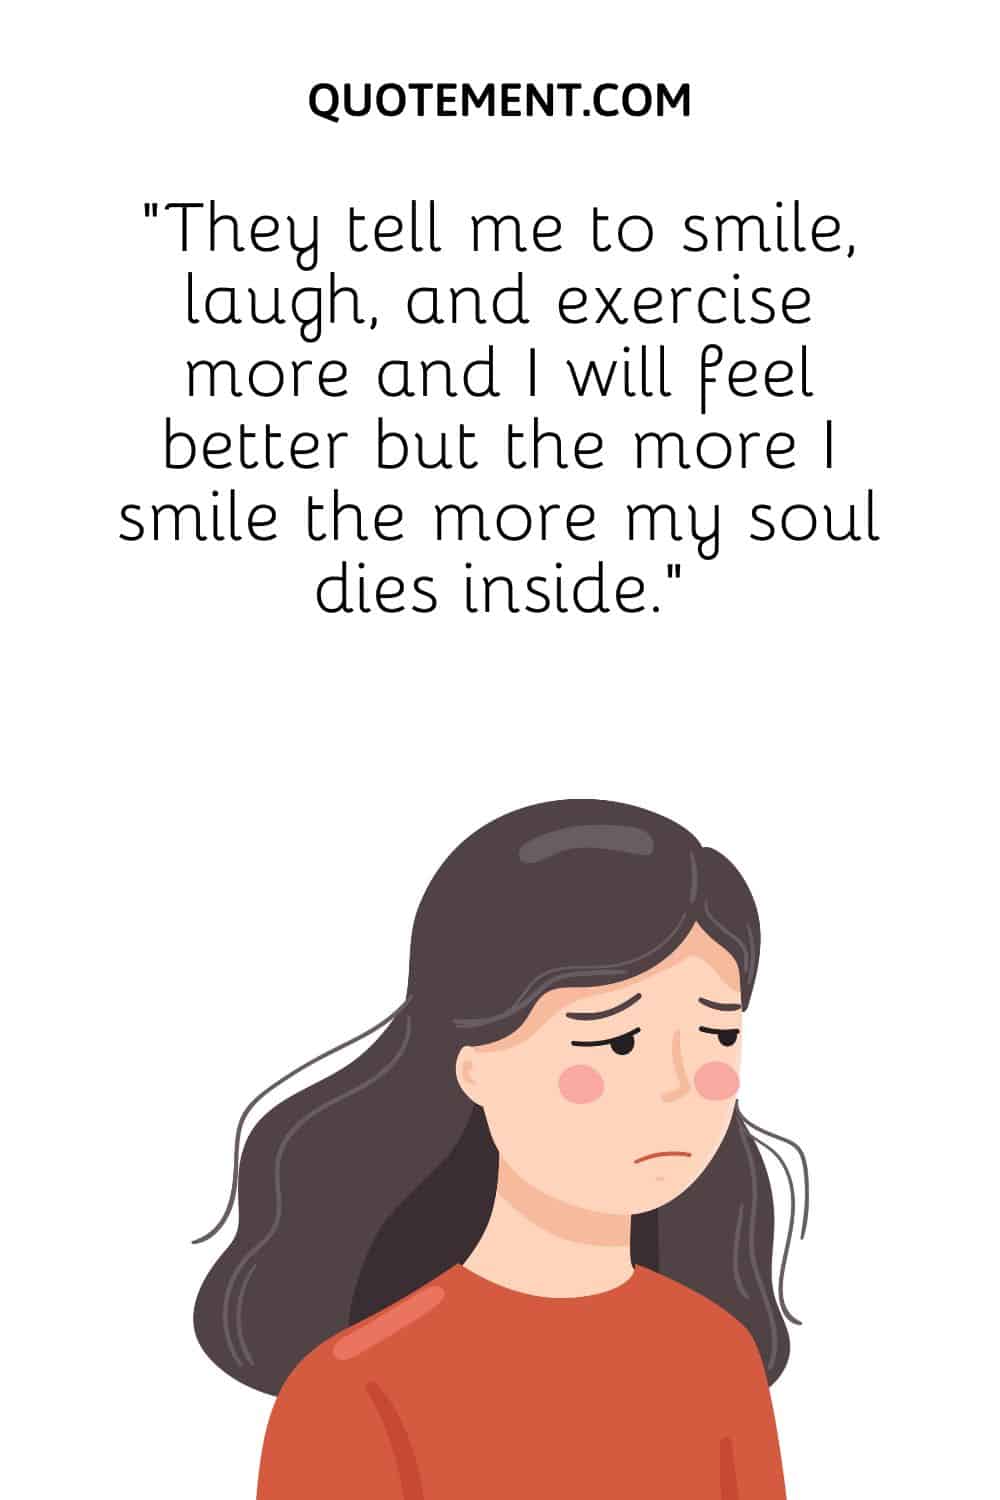 “They tell me to smile, laugh, and exercise more and I will feel better but the more I smile the more my soul dies inside.”